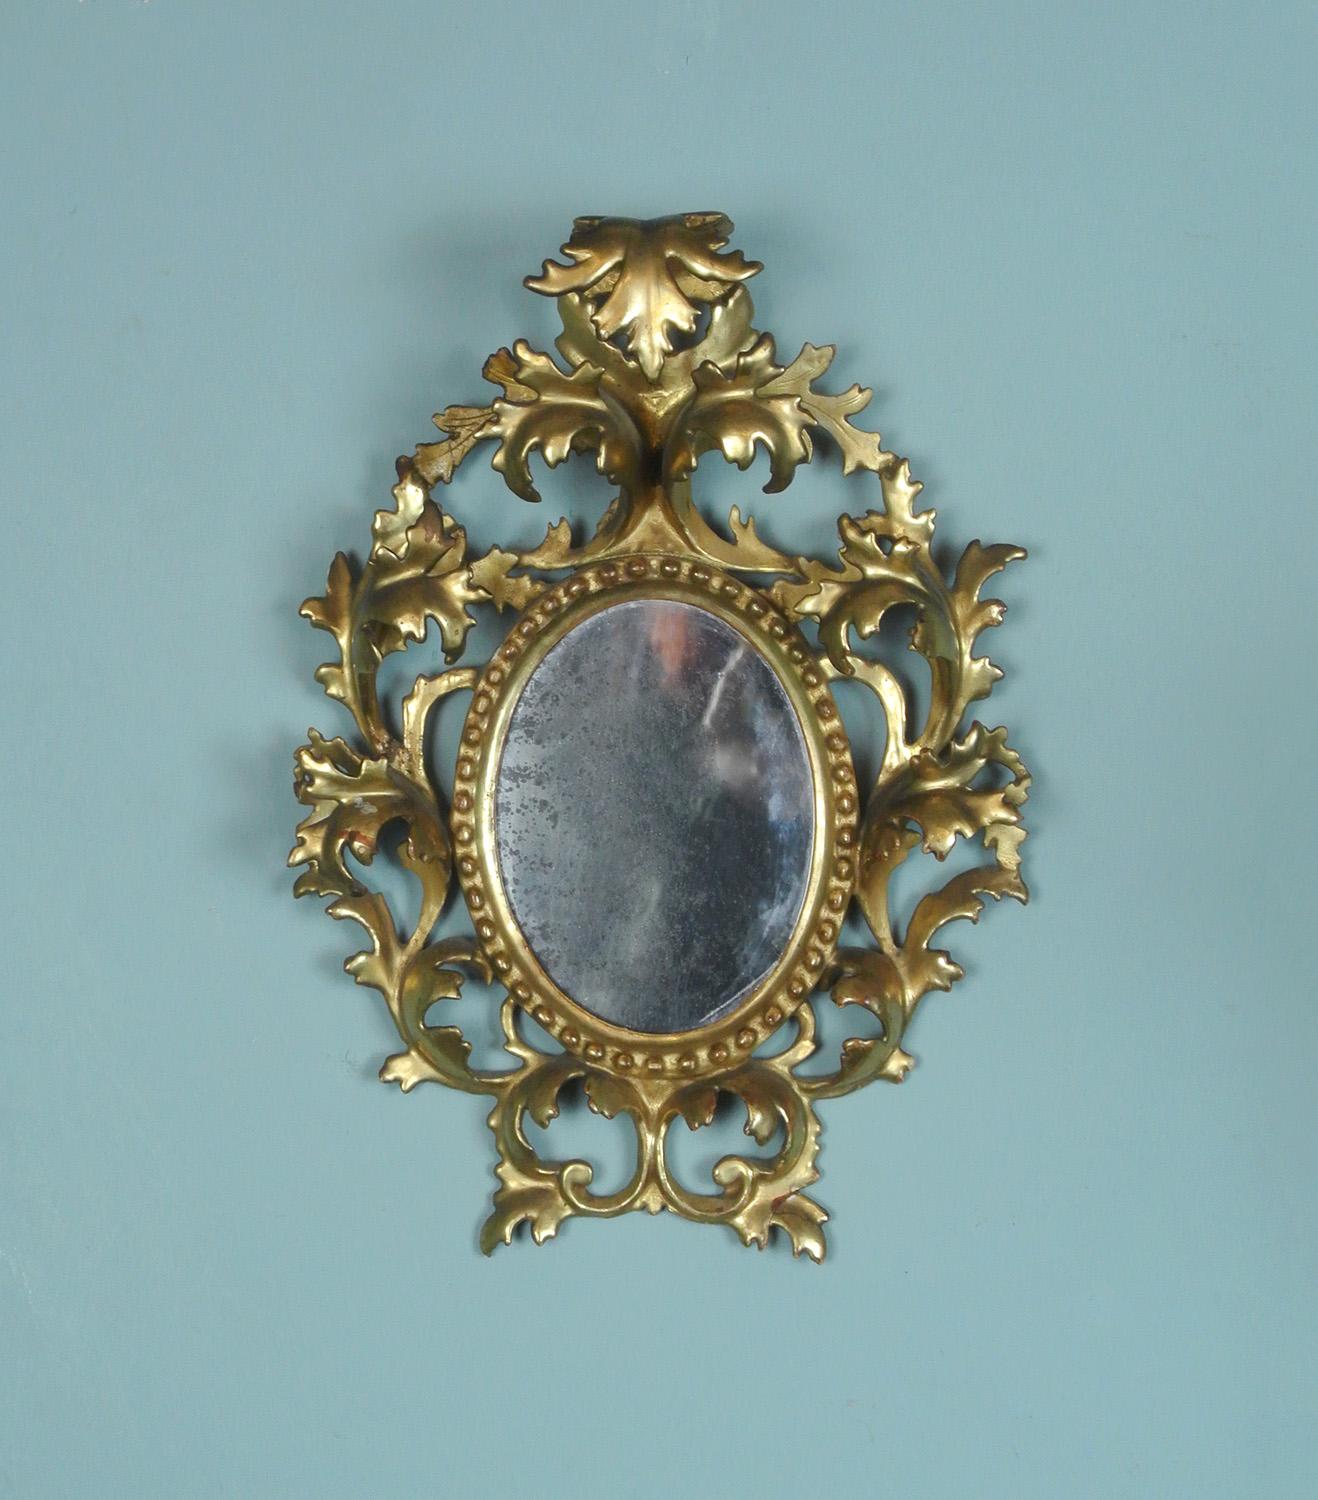 Charming 18th Century Florentine Mirror with Original Plate, circa 1790 In Good Condition For Sale In Heathfield, GB